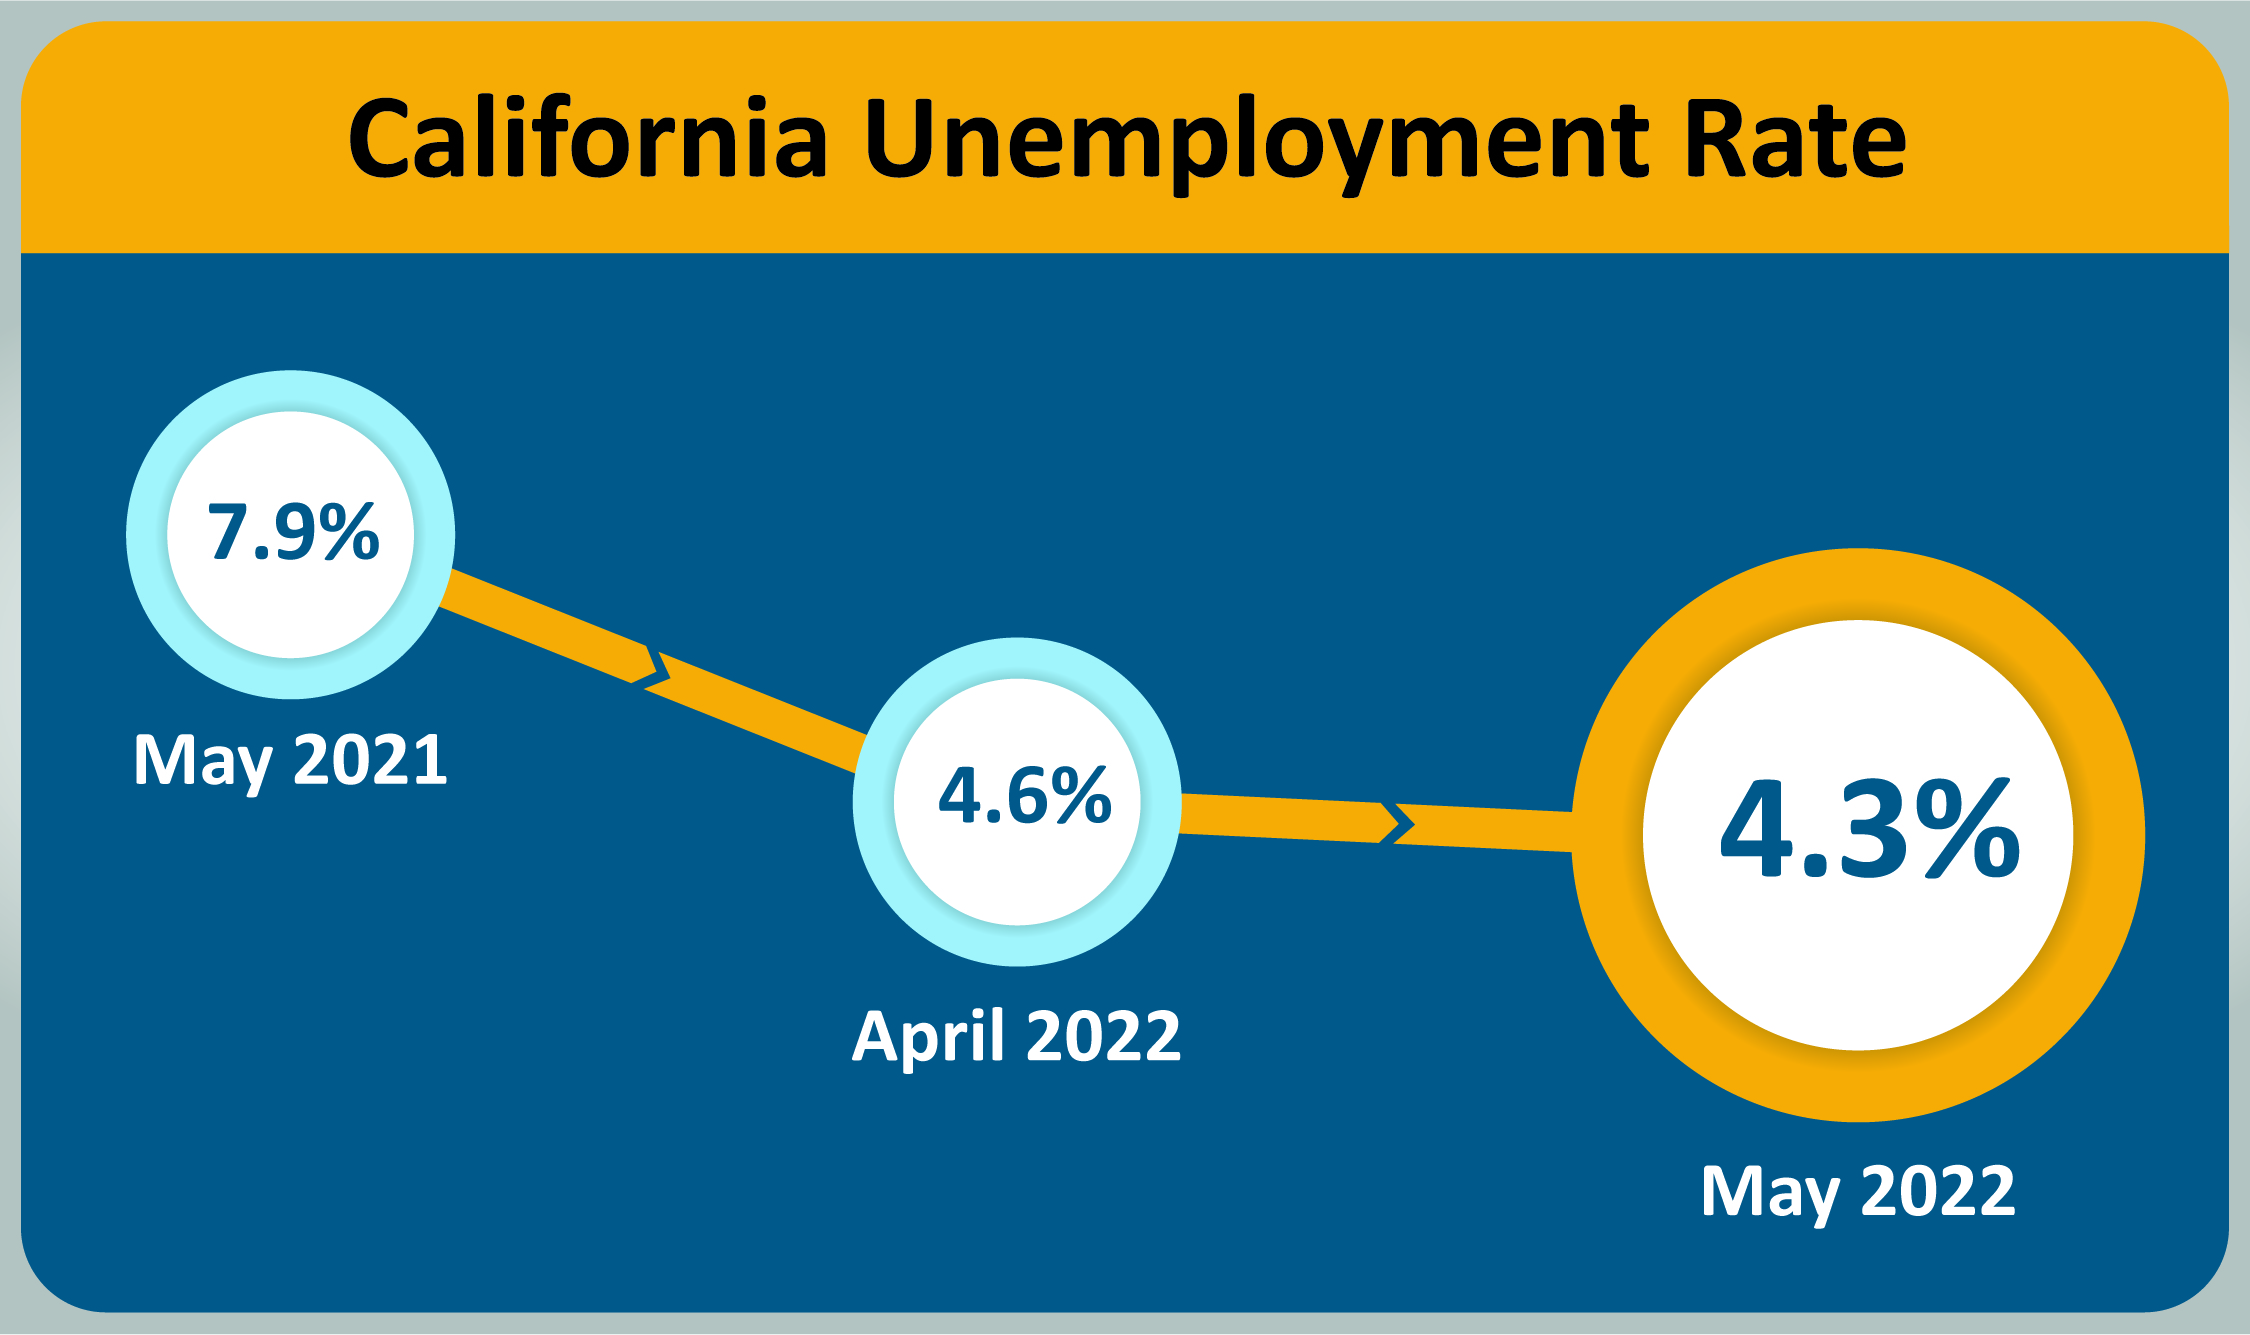 The California unemployment rate has dropped to 4.3 percent from 8.3 percent in April 2021